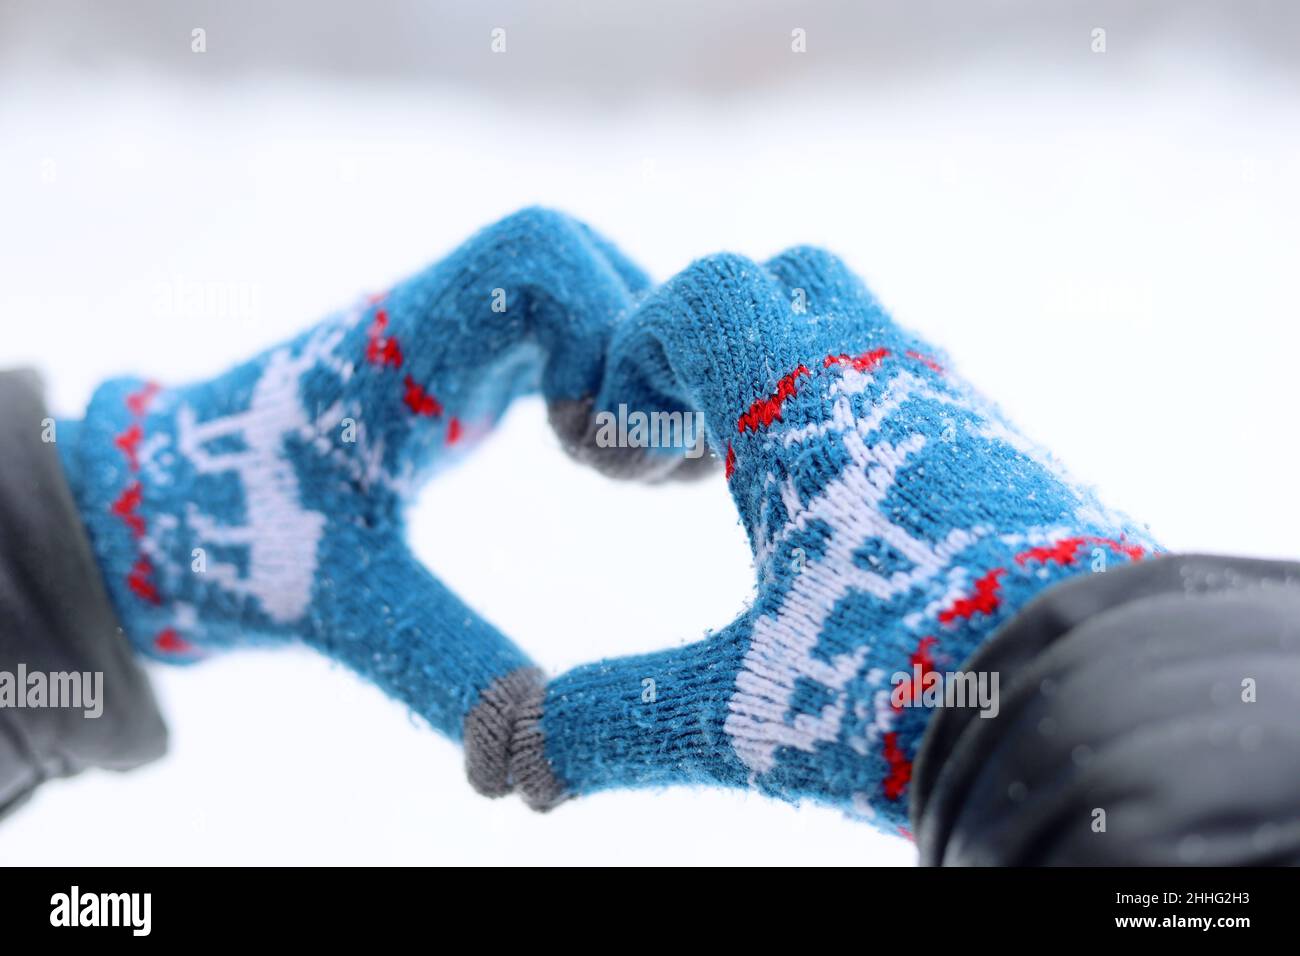 Hands in knitted gloves folded in the shape of a heart on snow background. Declaration of love, concept of Valentine's day, winter weather Stock Photo